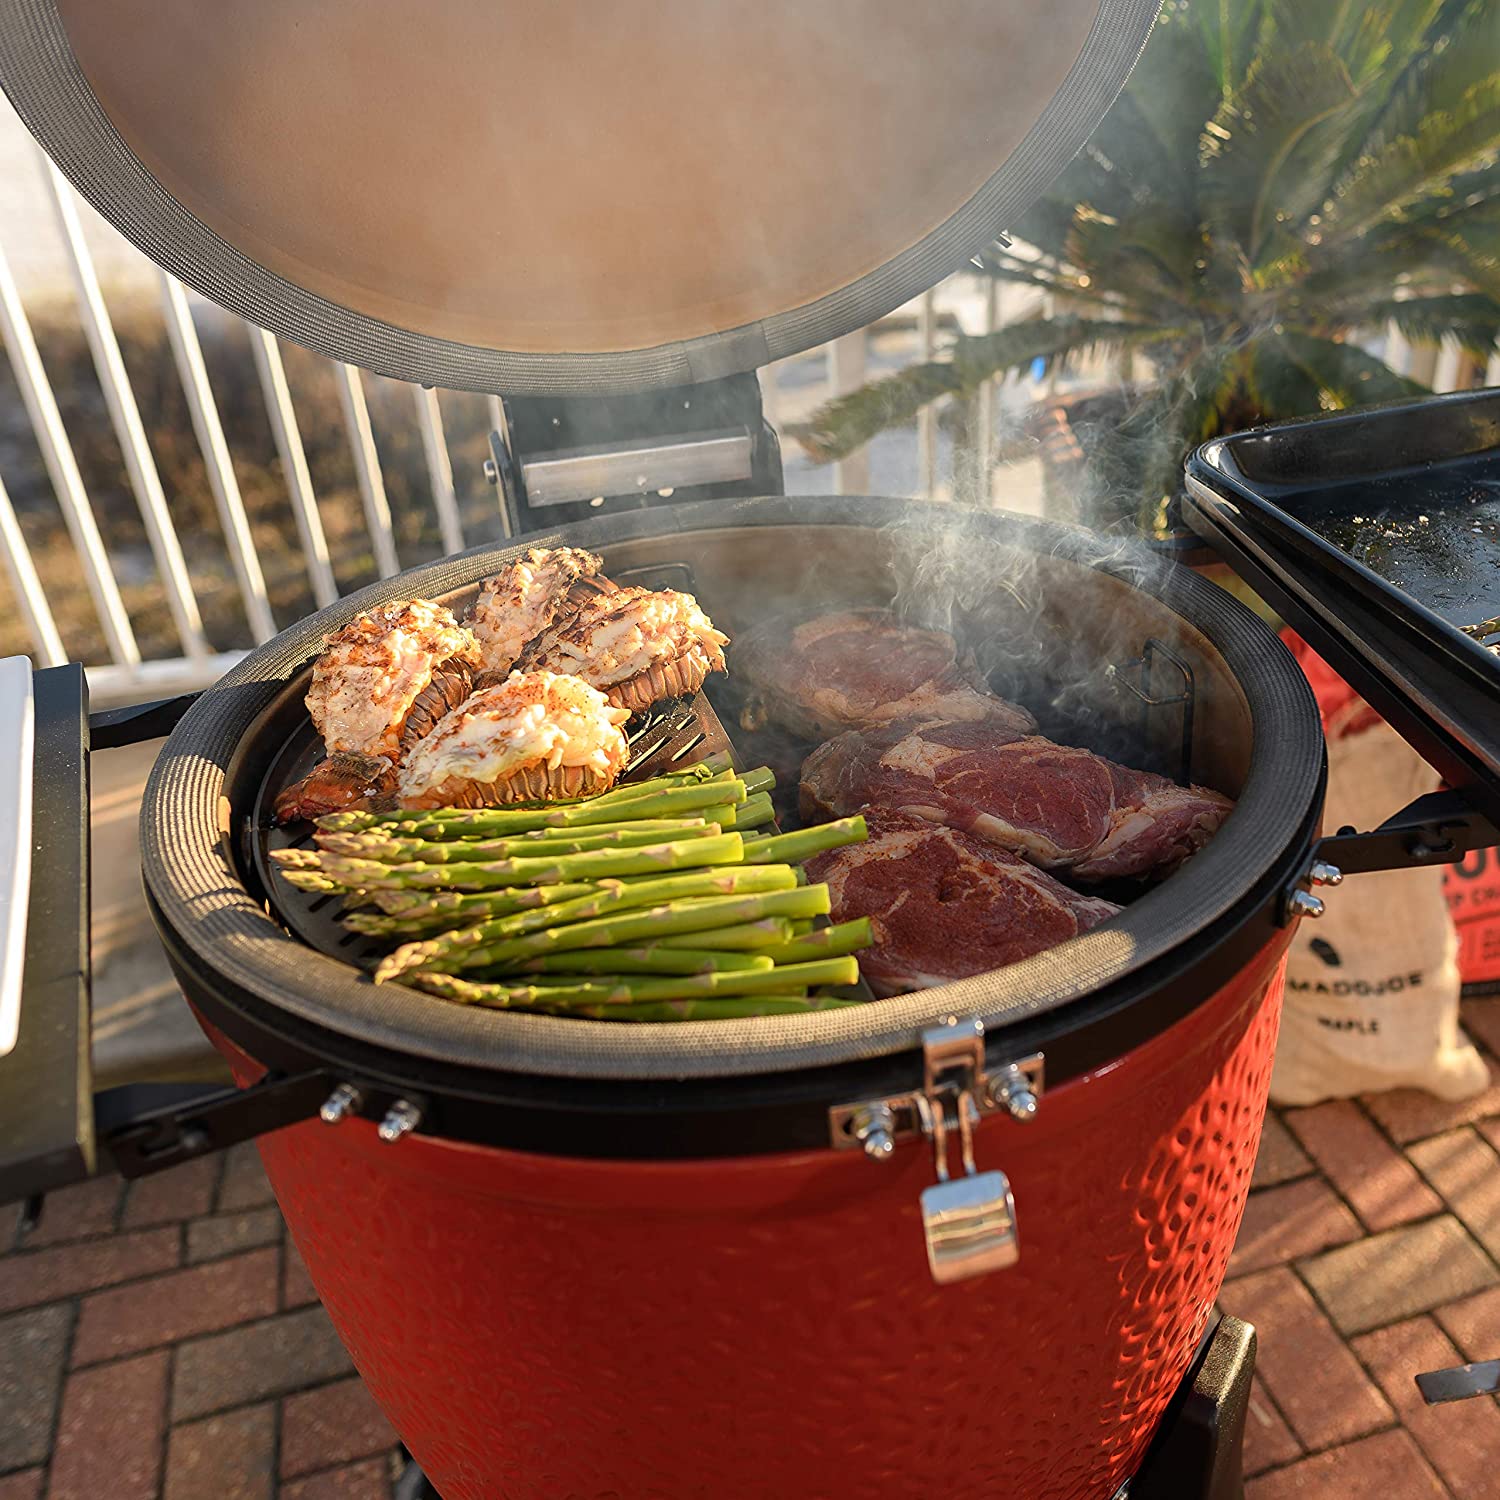 Green Egg Grills Have Been Sold Out All Summer – These Are the Best Alternatives